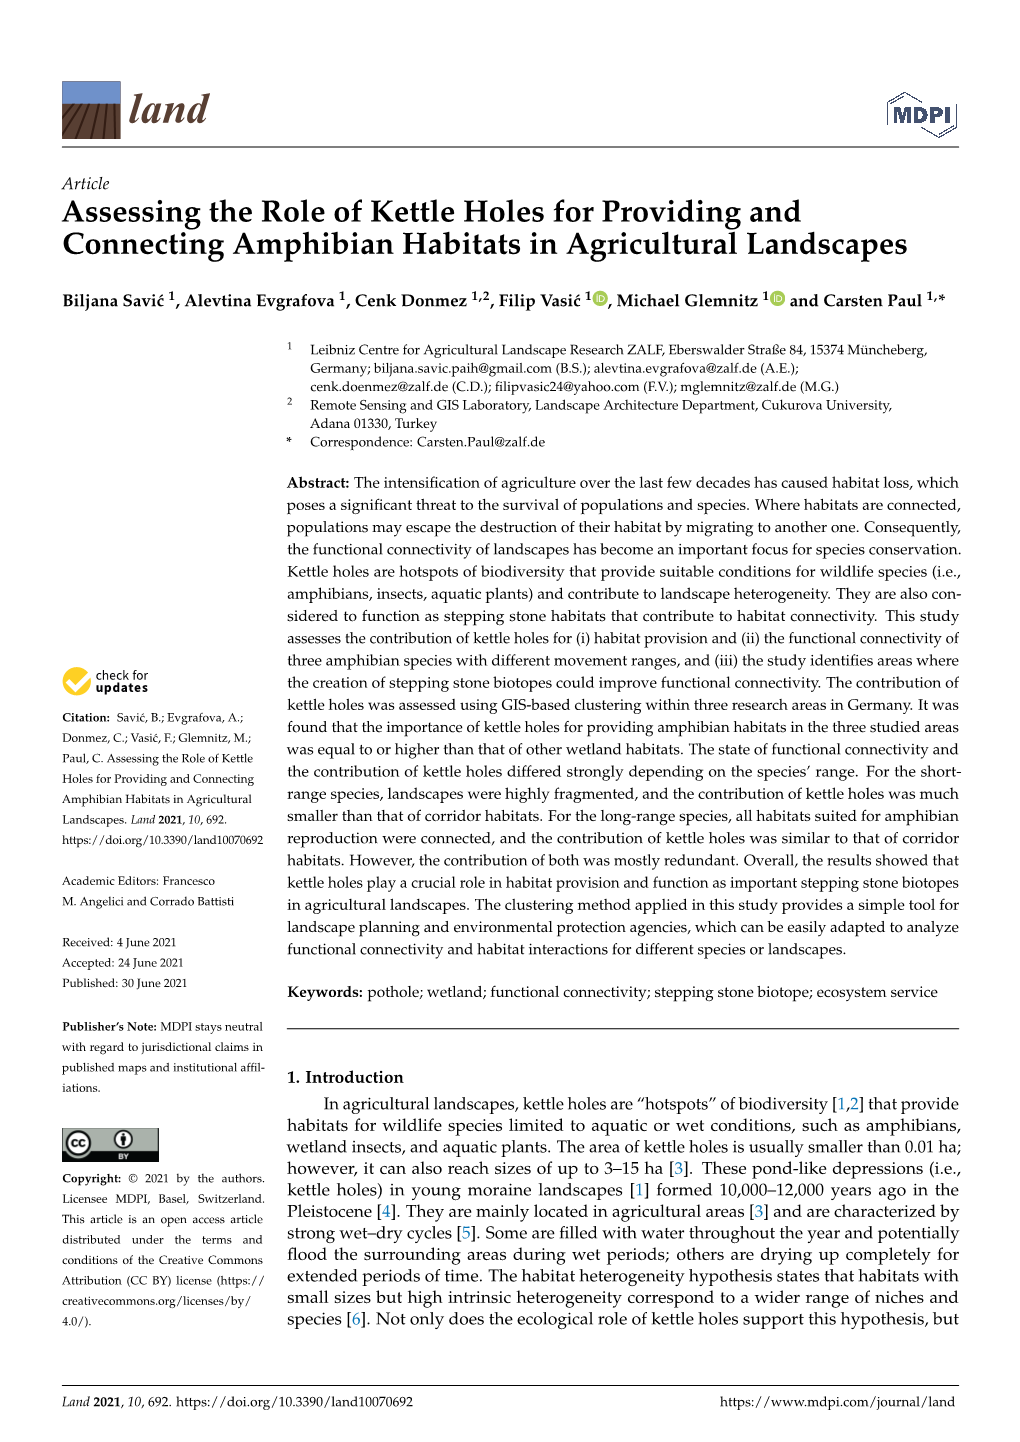 Assessing the Role of Kettle Holes for Providing and Connecting Amphibian Habitats in Agricultural Landscapes